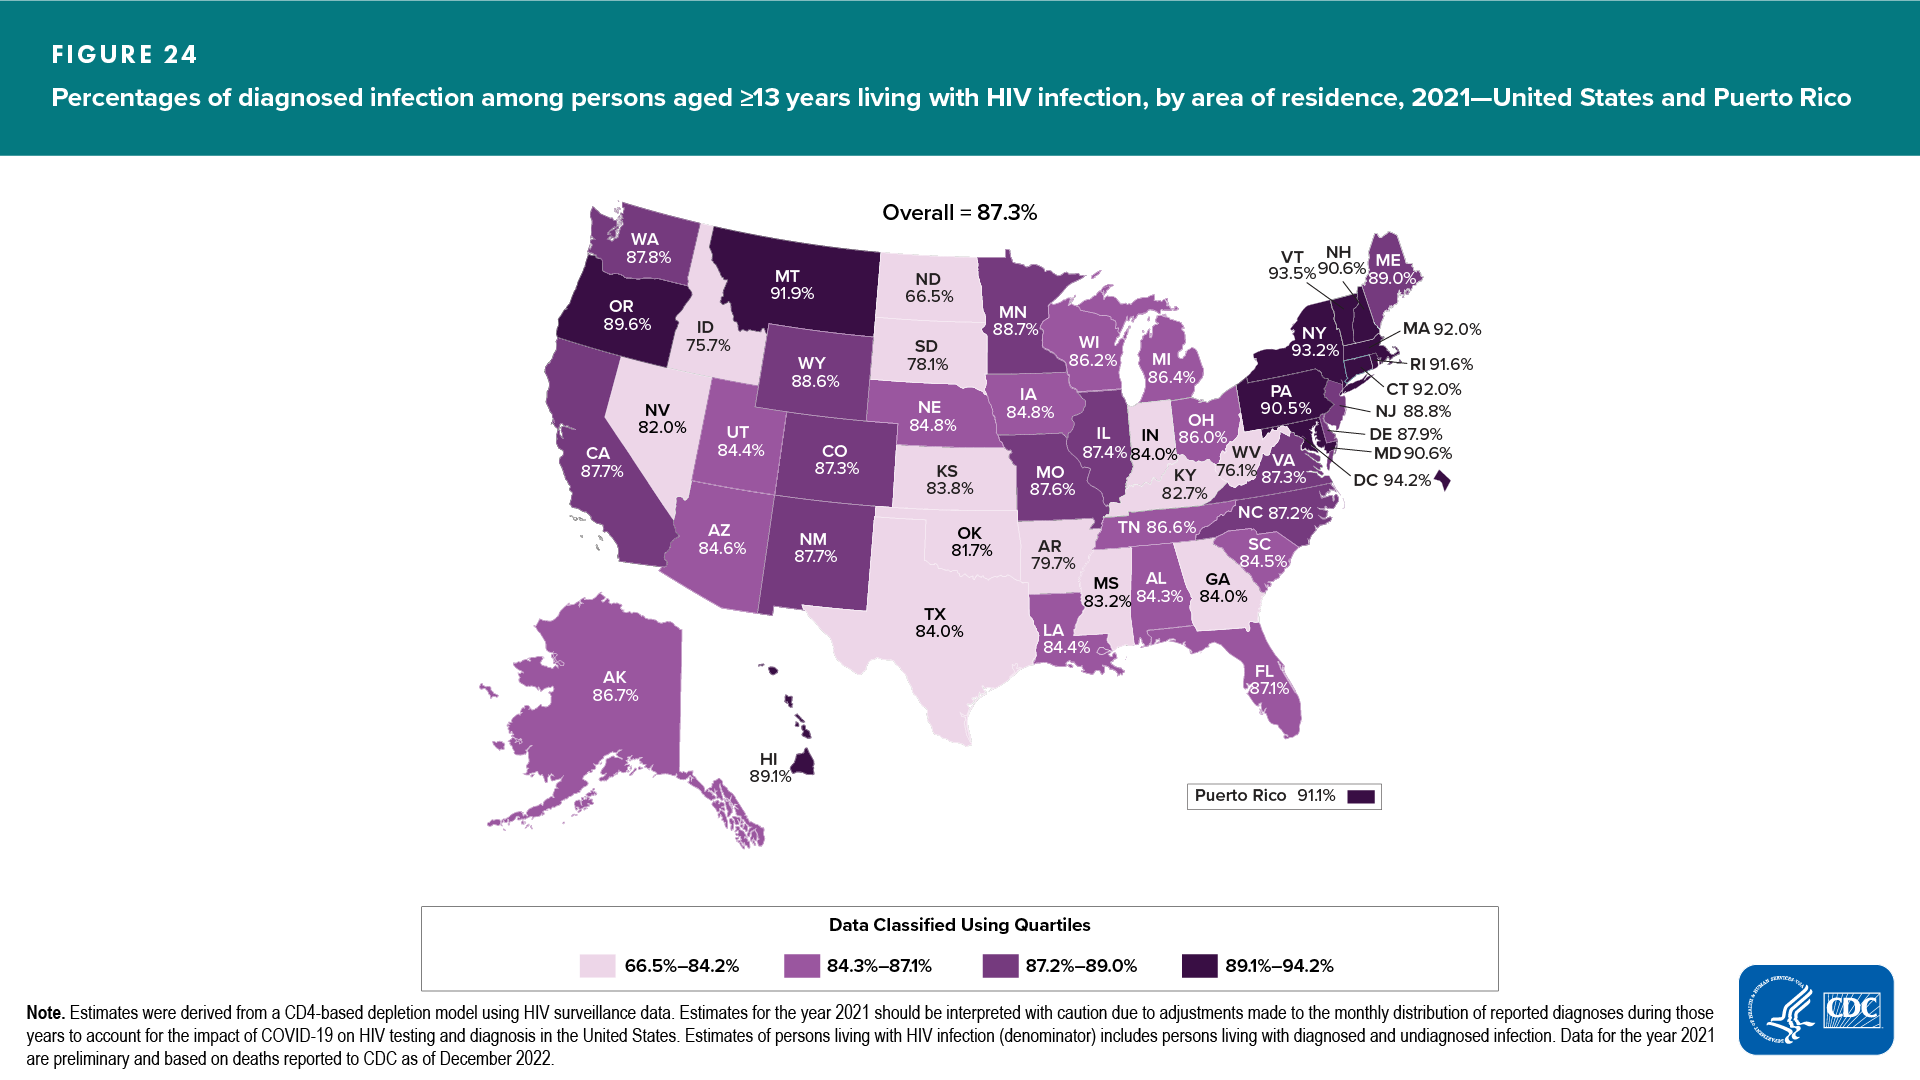 Figure 24. Percentages of diagnosed infection among persons aged ≥13 years living with HIV infection, by area of residence, 2021—United States and Puerto Rico